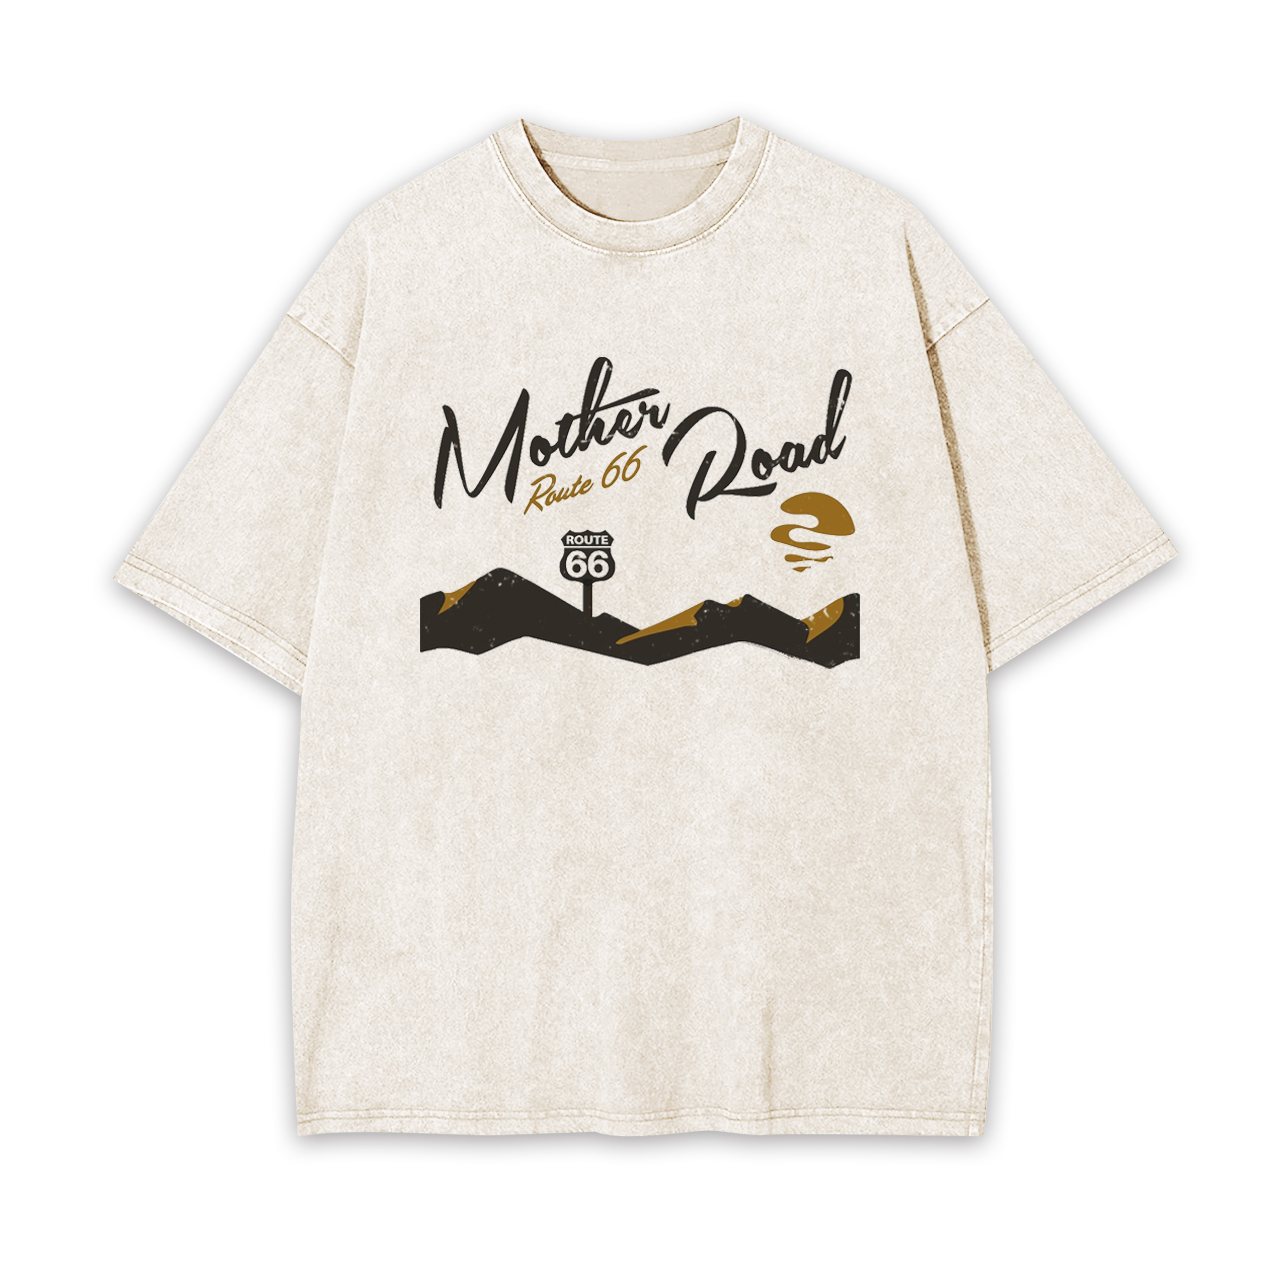 Mother Road's Historic Route 66 Garment-dye Tees